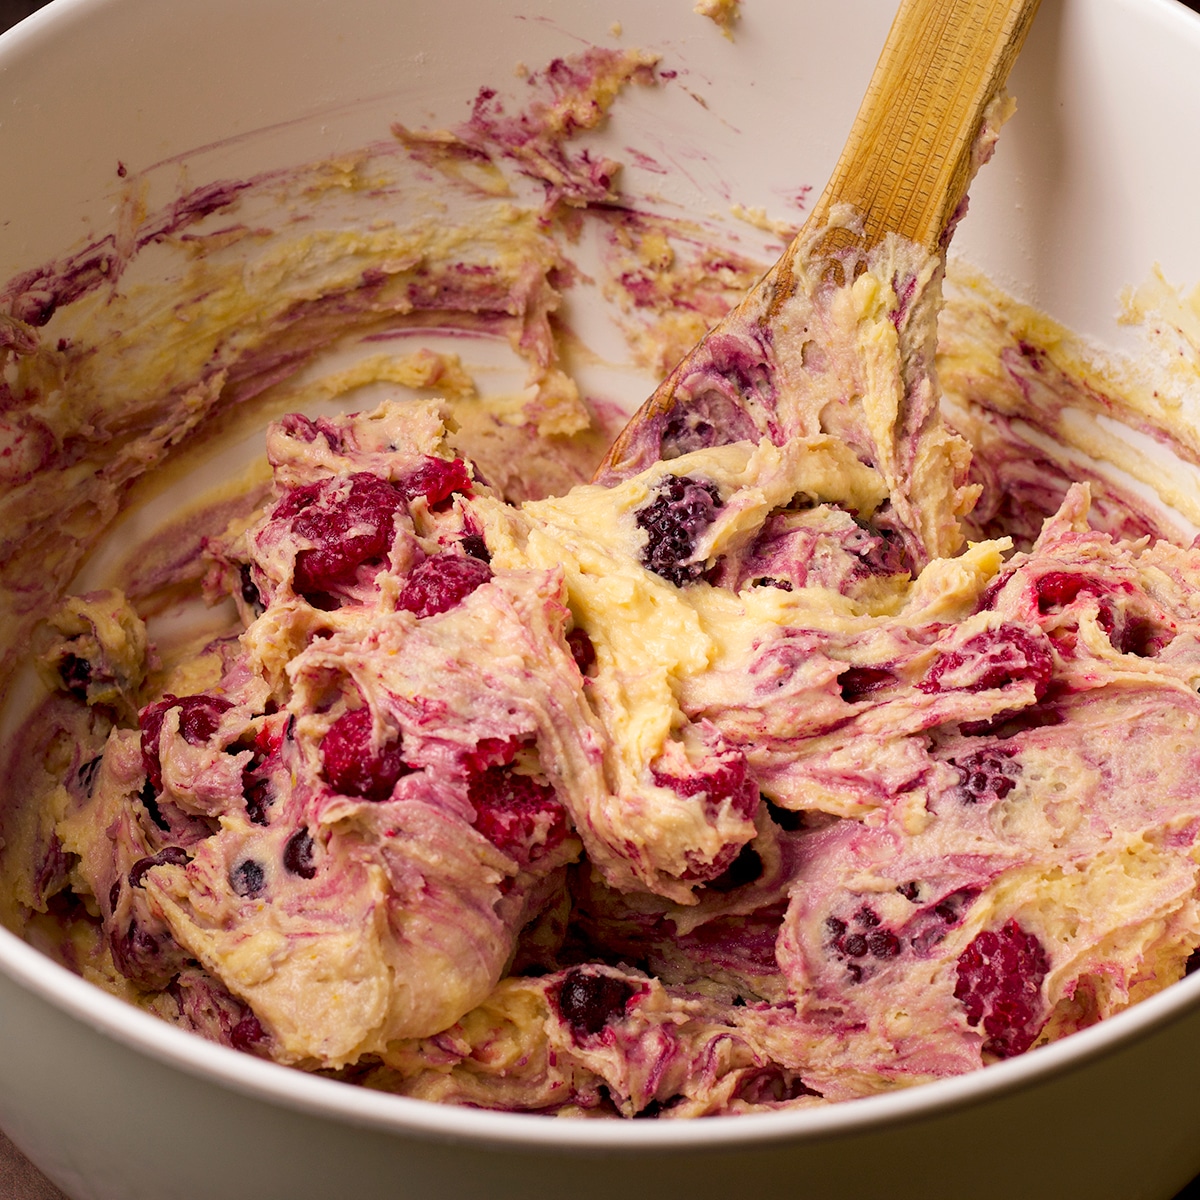 Using a wooden spoon to mix berries into muffin batter.